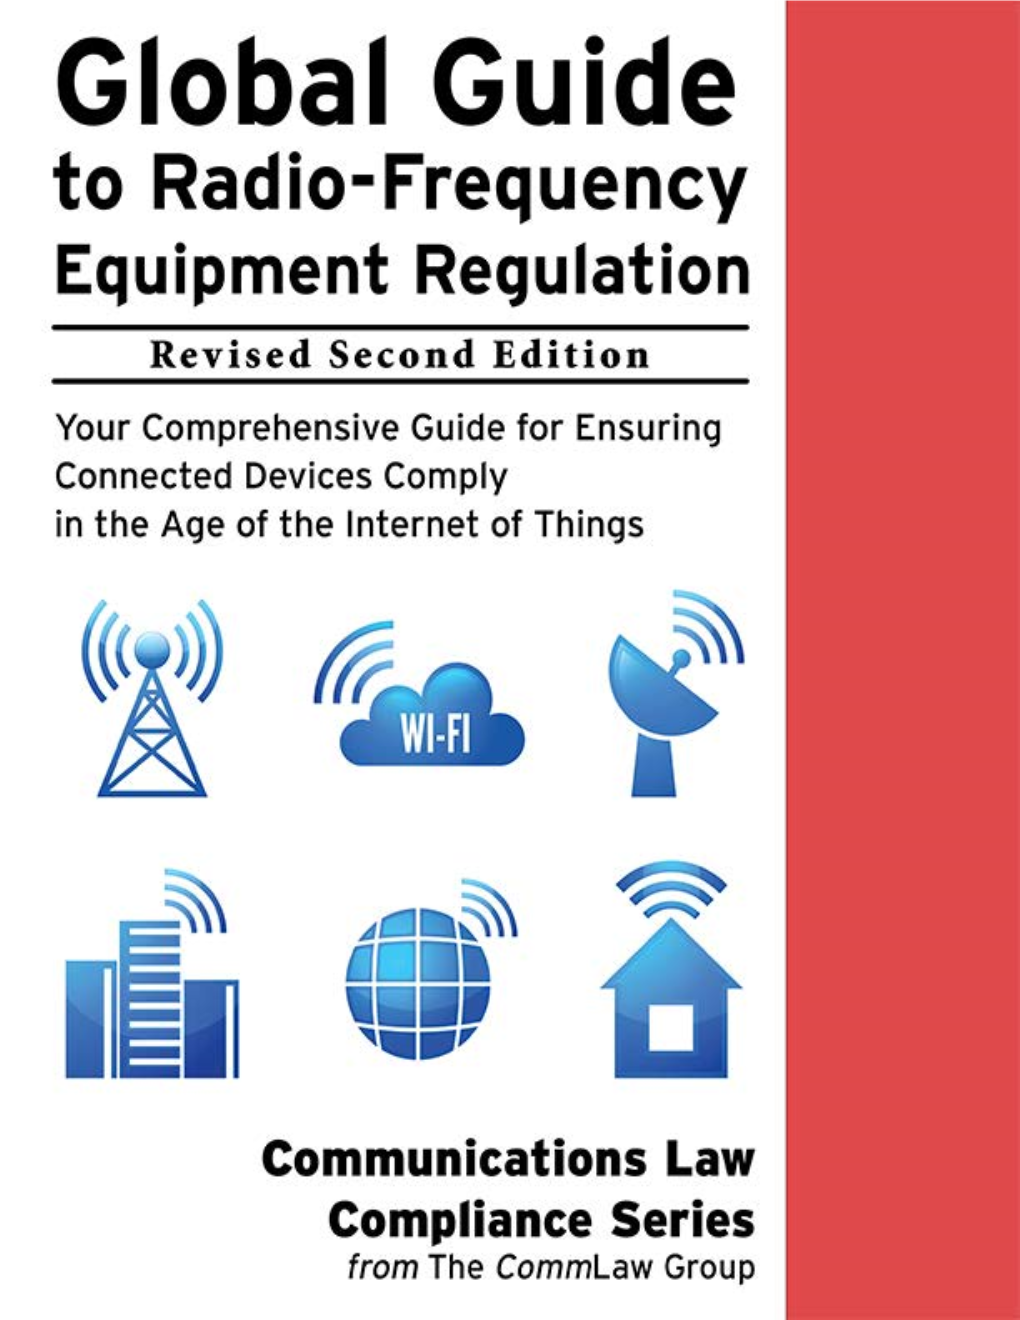 Global Guide to Radio-Frequency (RF) Equipment Regulation: Your Comprehensive Guide for Ensuring Connected Devices Comply in the Age of the Internet of Things (Iot)